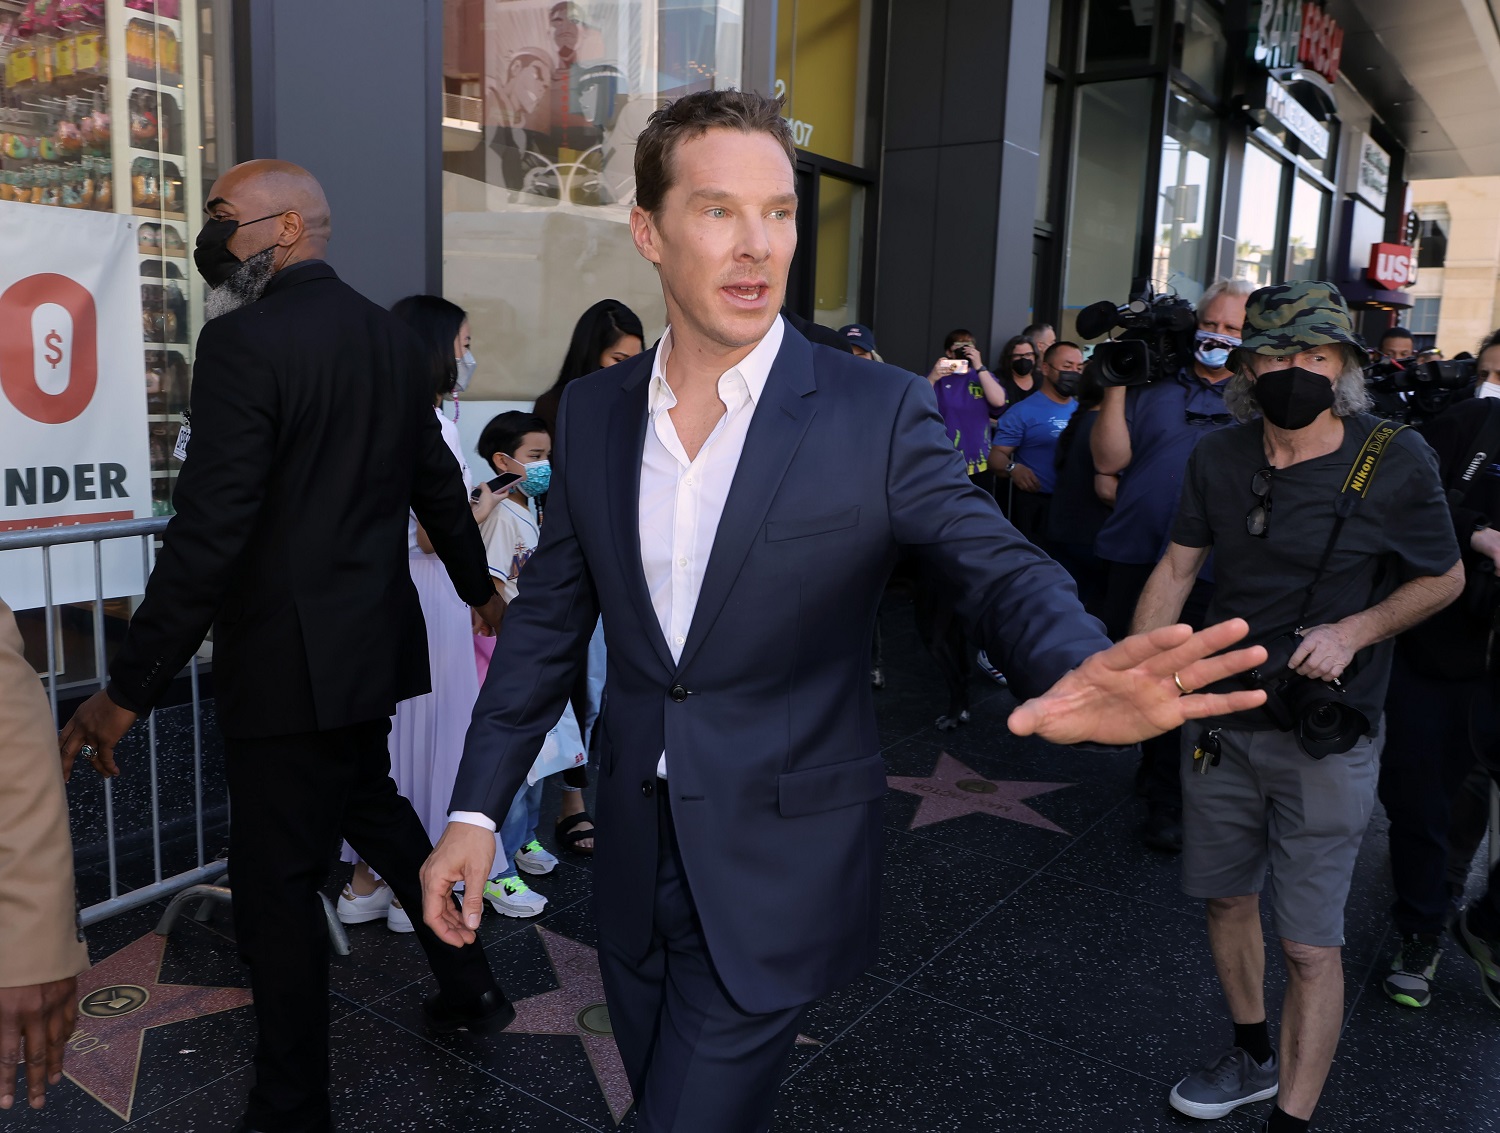 Benedict Cumberbatch attends the Hollywood Walk of Fame Star Ceremony for Benedict Cumberbatch on February 28, 2022 in Hollywood, California. (Photo by Kevin Winter/Getty Images)